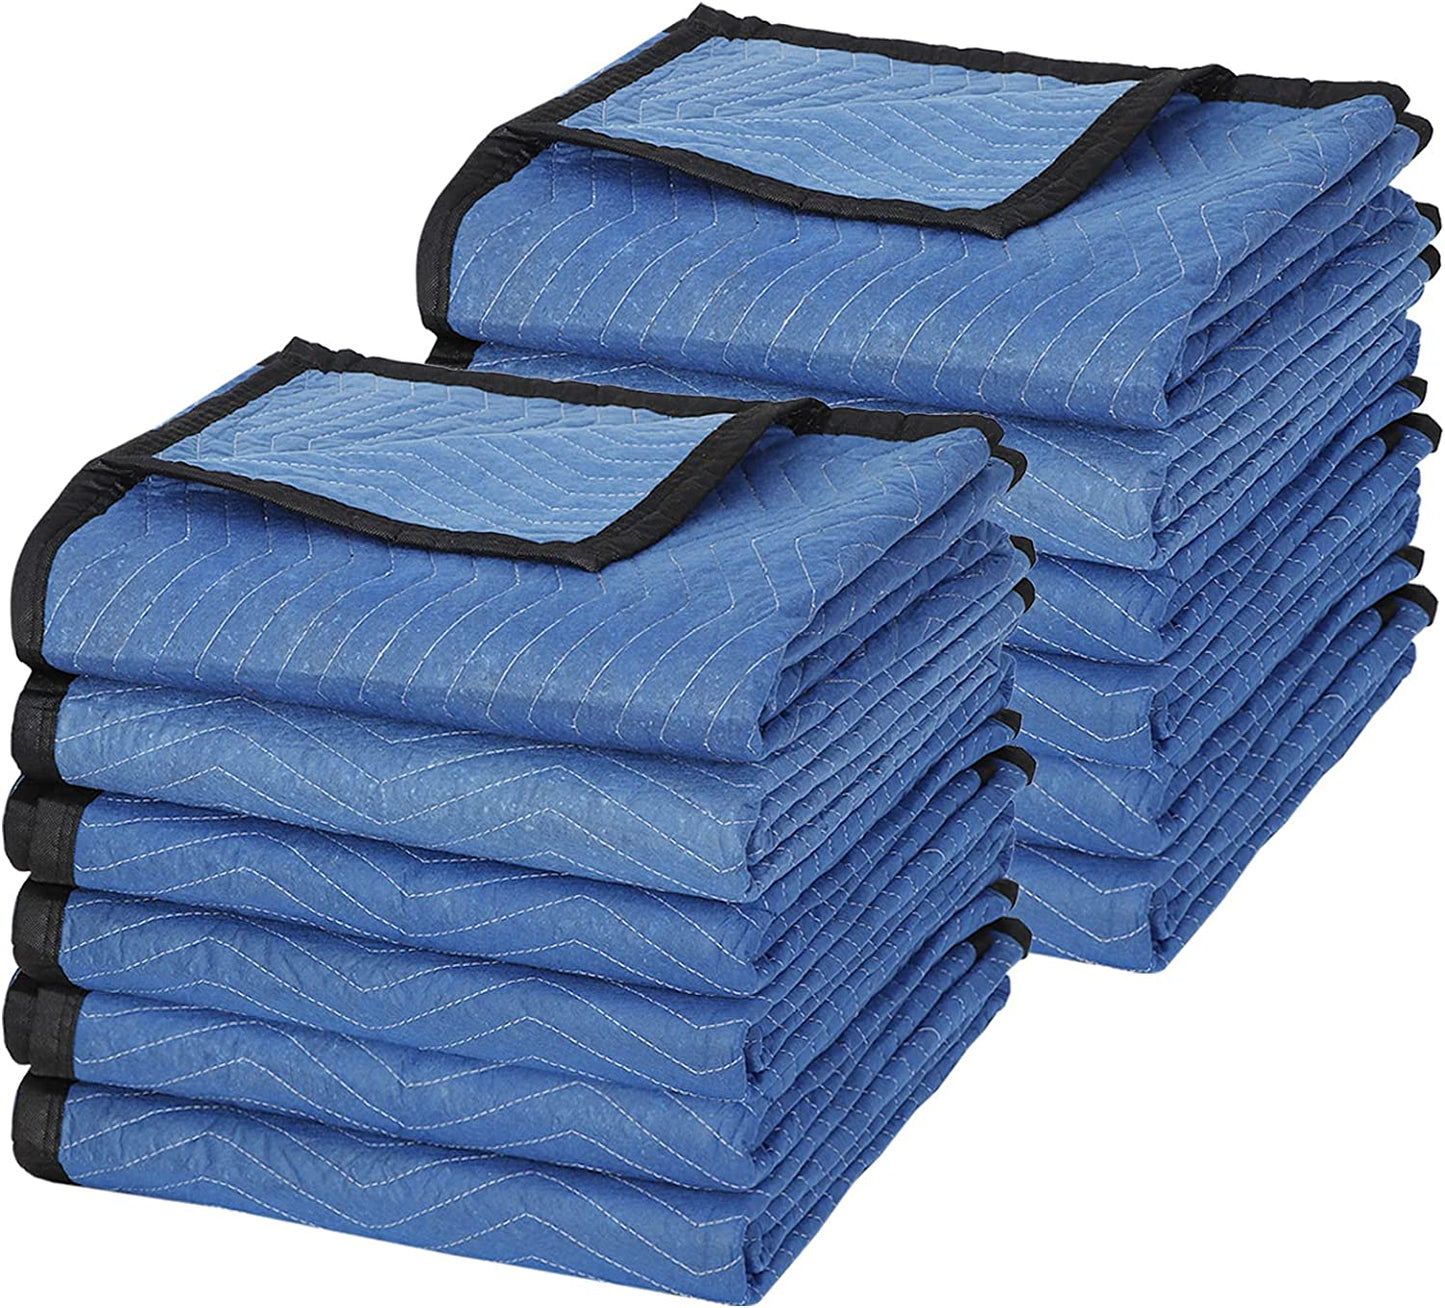 Moving Blankets 12 Pack,80’’x 72’’(35 lb/dz Weight) Quilted Shipping Furniture Pads Packing Blanket Moving Supplies,Furniture Protection and Pack Blankets